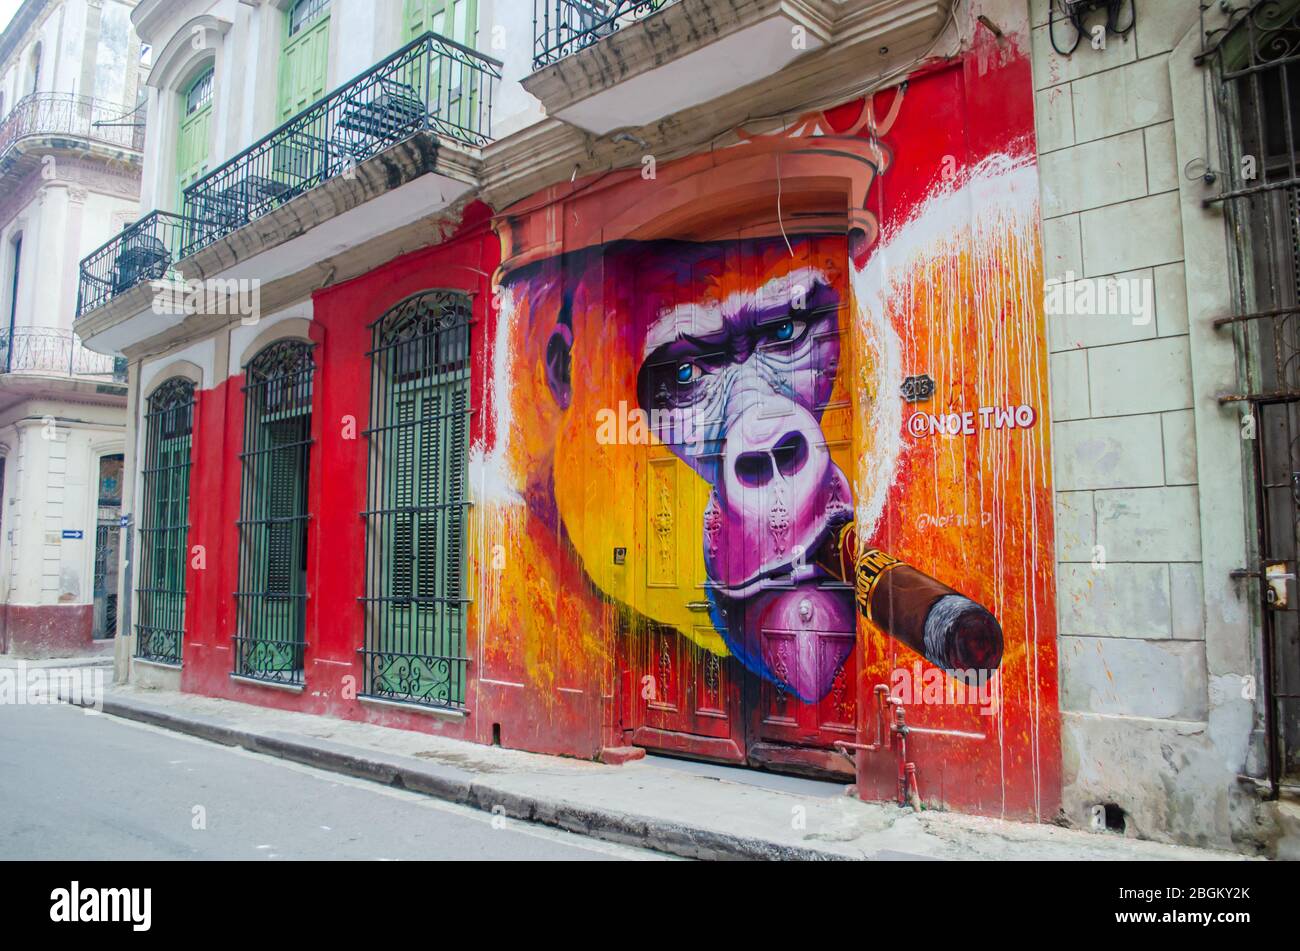 Old Havana colorful street. A graffiti wall by the artist Noé Two is seen on the right Stock Photo